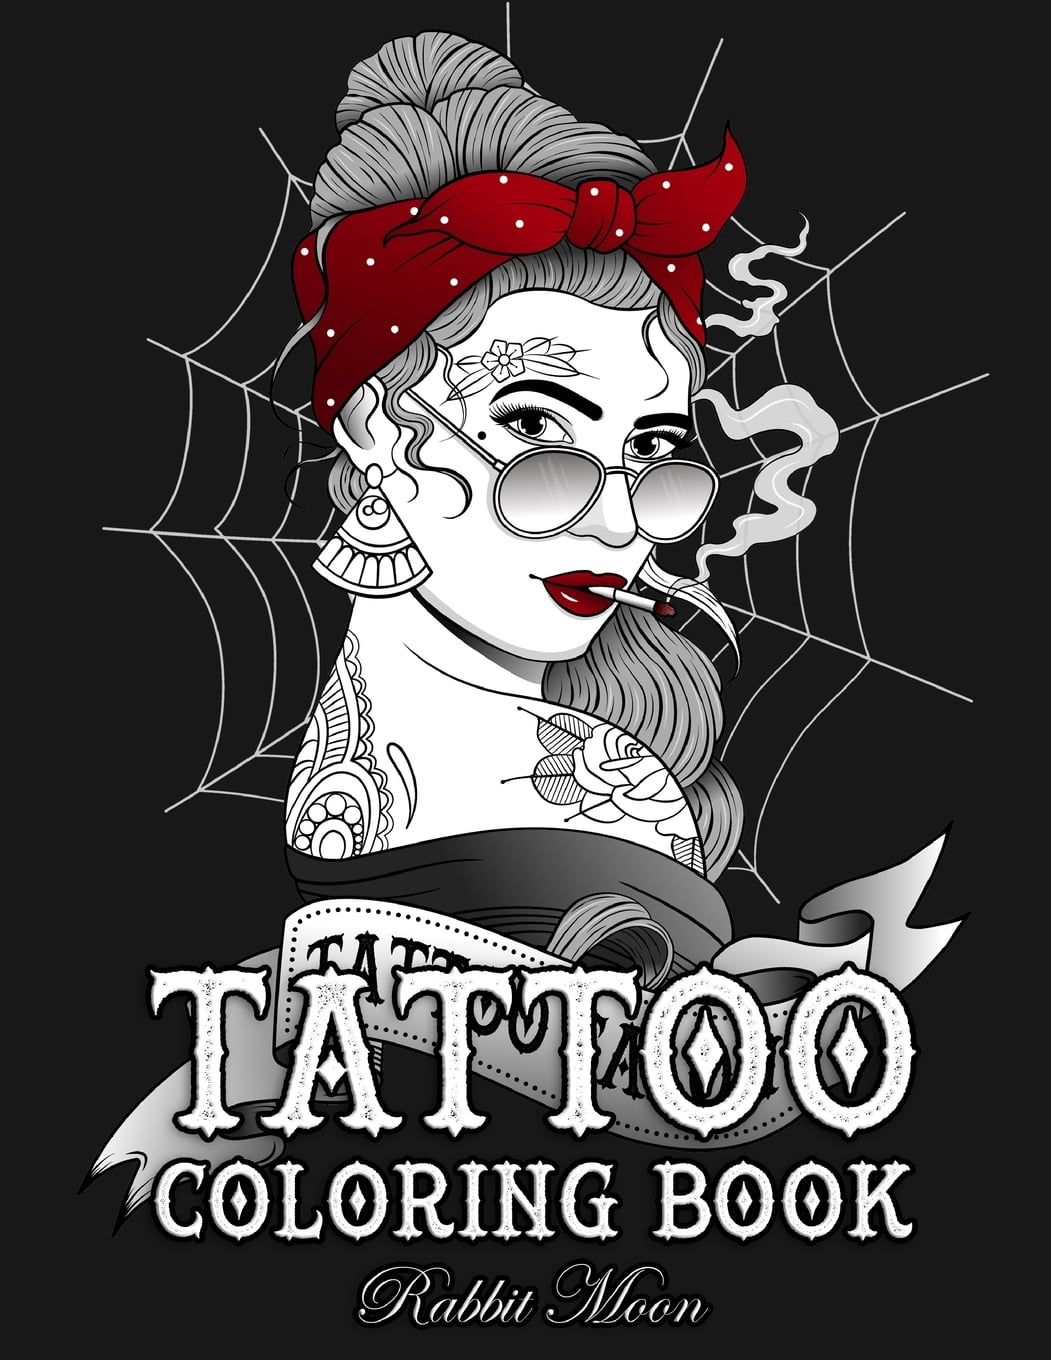 Tattoo coloring books tattoo coloring book an adult coloring book with awesome sexy and relaxing tattoo designs for men and women series paperback